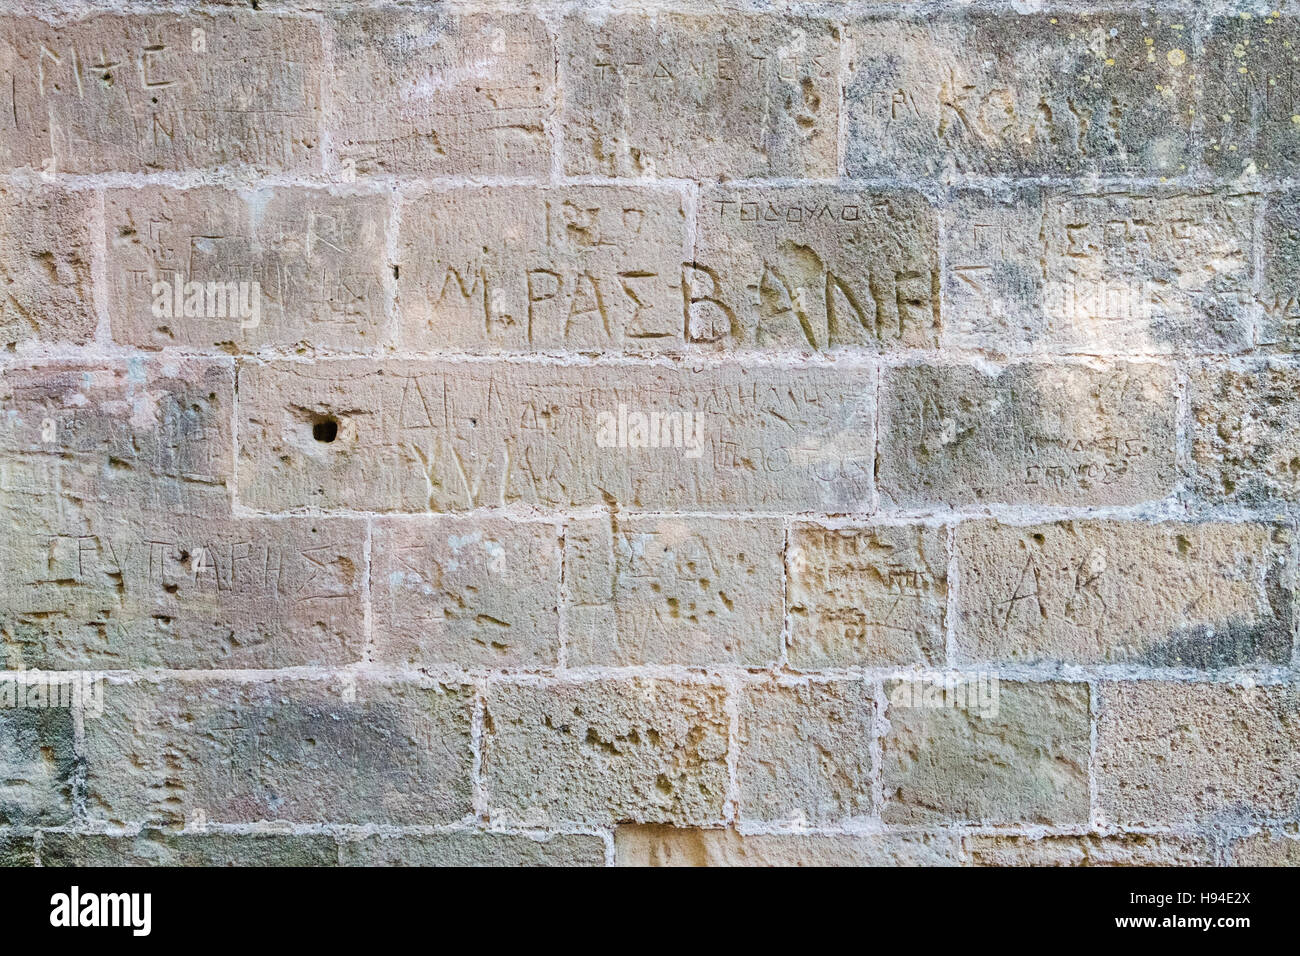 Old brick wall background with Greek graffiti carved into it. Stock Photo